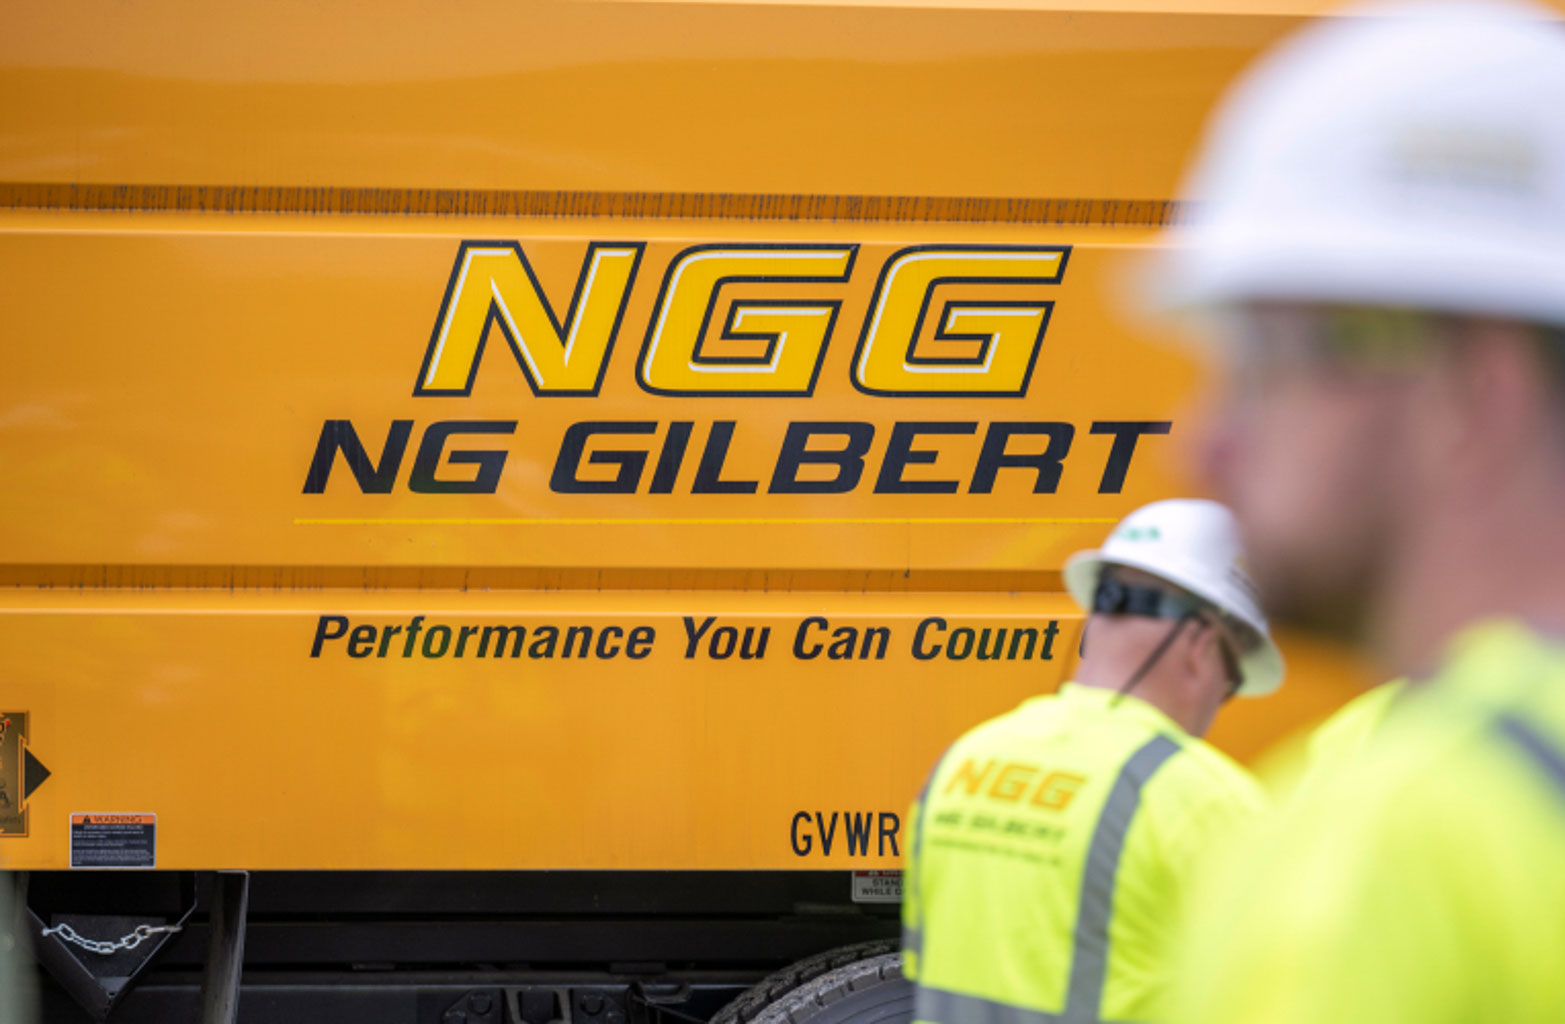 A close-up of the NG Gilbert logo on a truck.